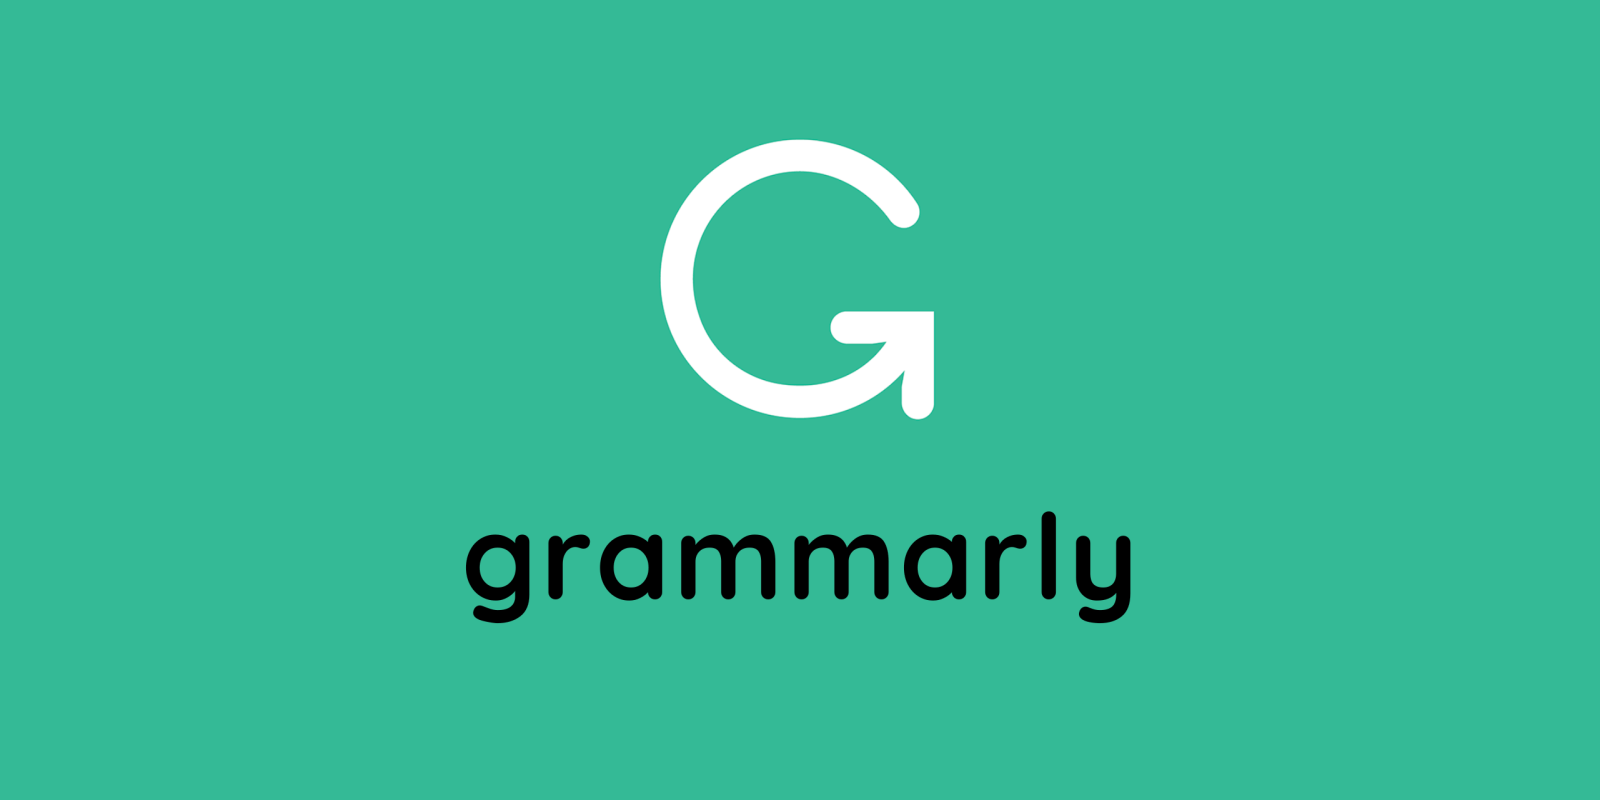 grammarly premium account for free by using grammarly premium cookies